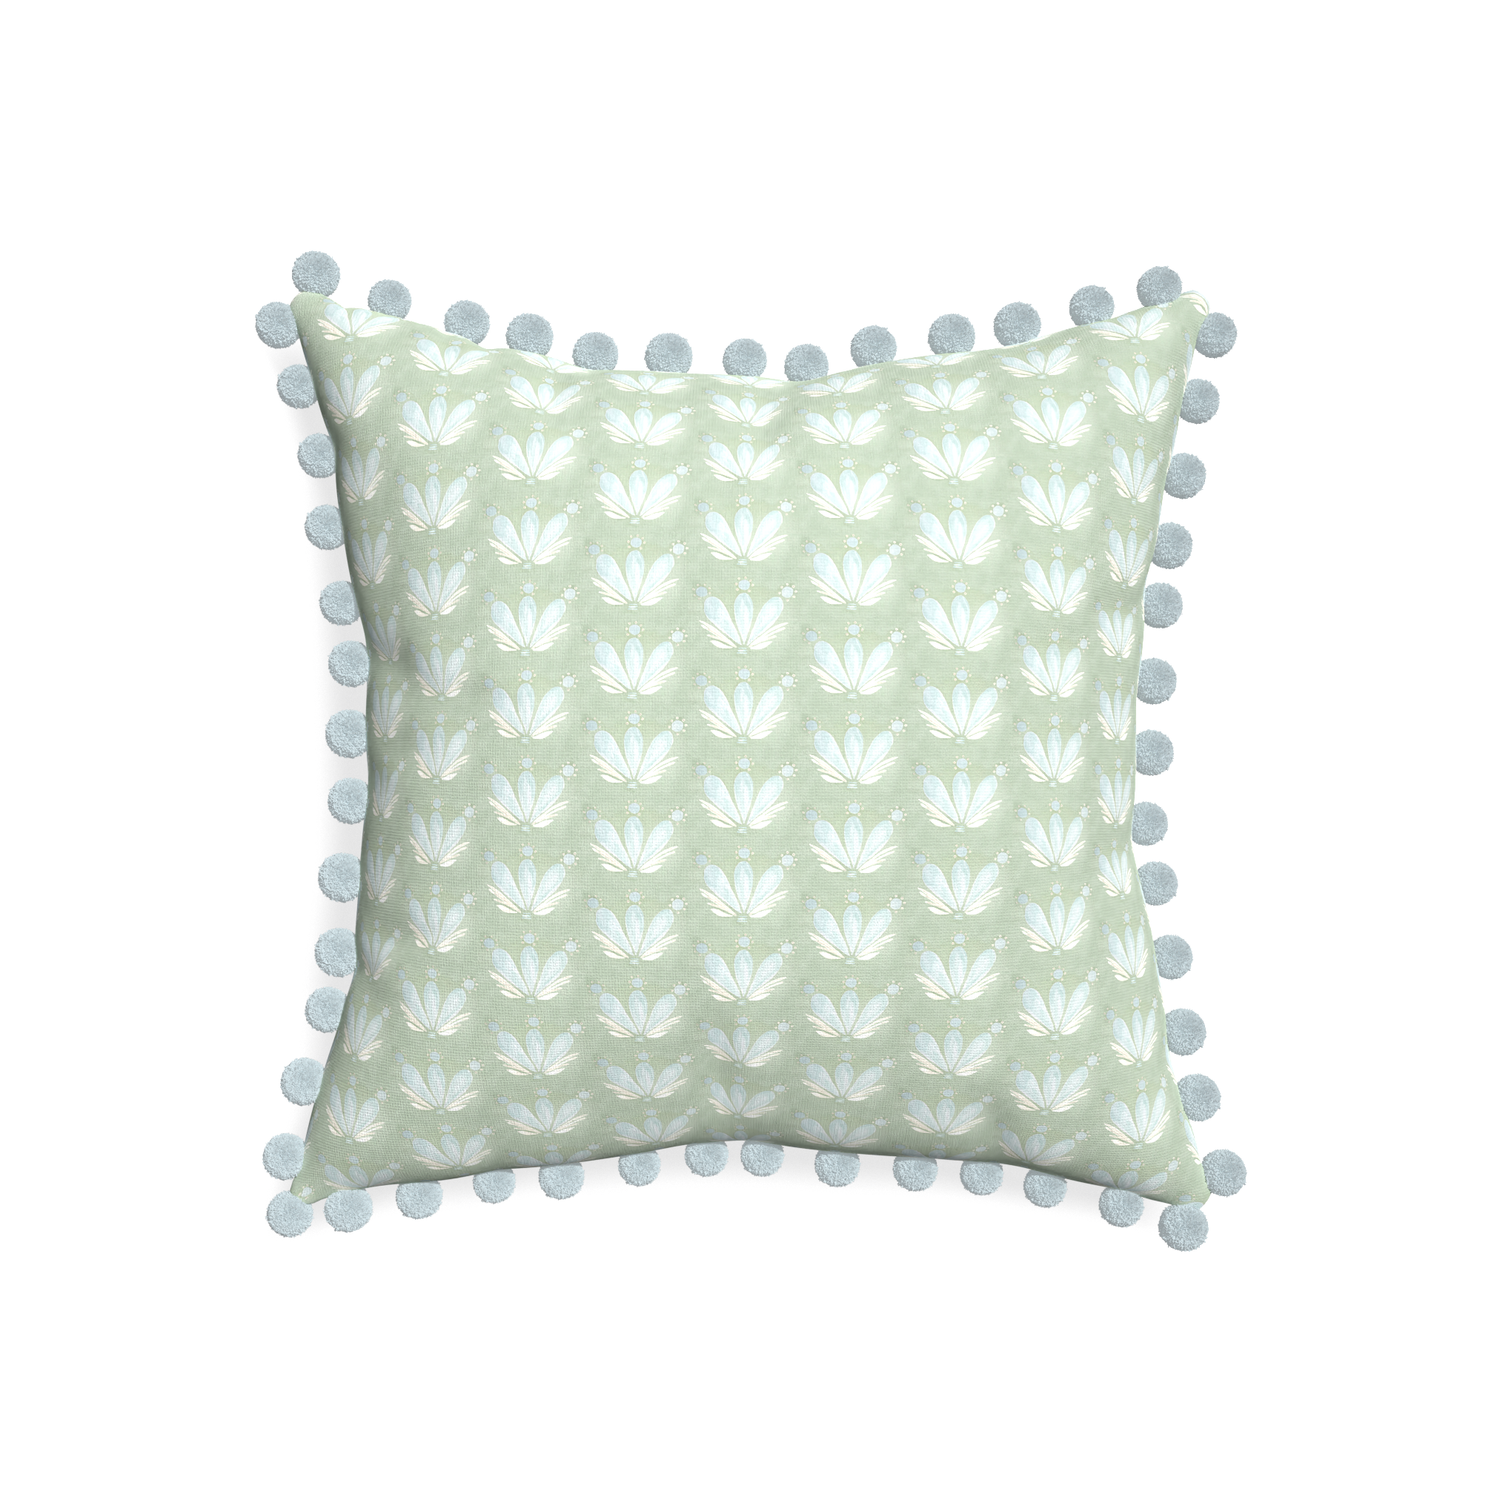 20-square serena sea salt custom blue & green floral drop repeatpillow with powder pom pom on white background